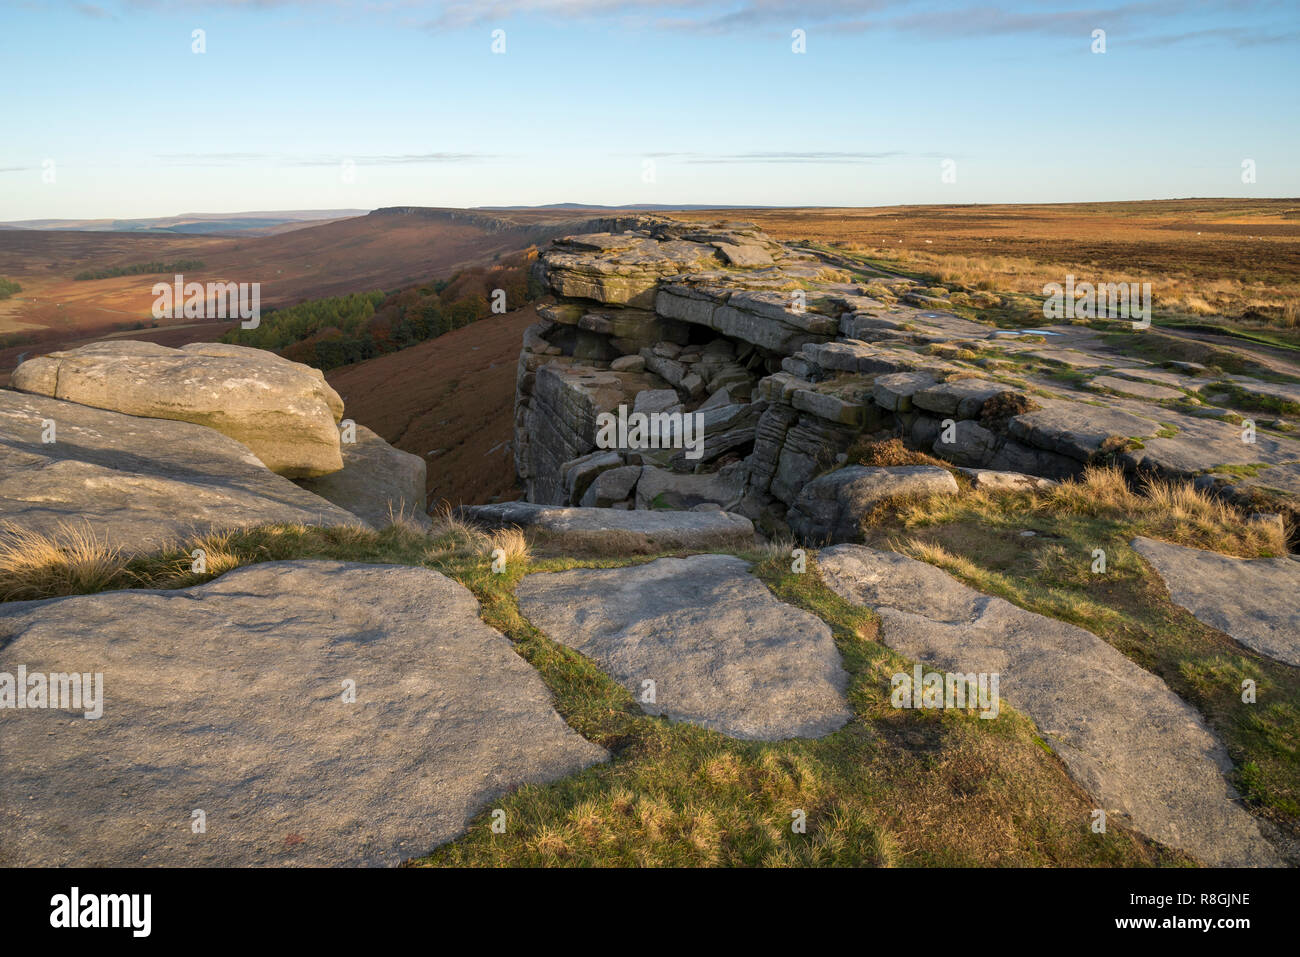 Autumn morning on Stanage Edge in the Peak District national park, England. Stock Photo